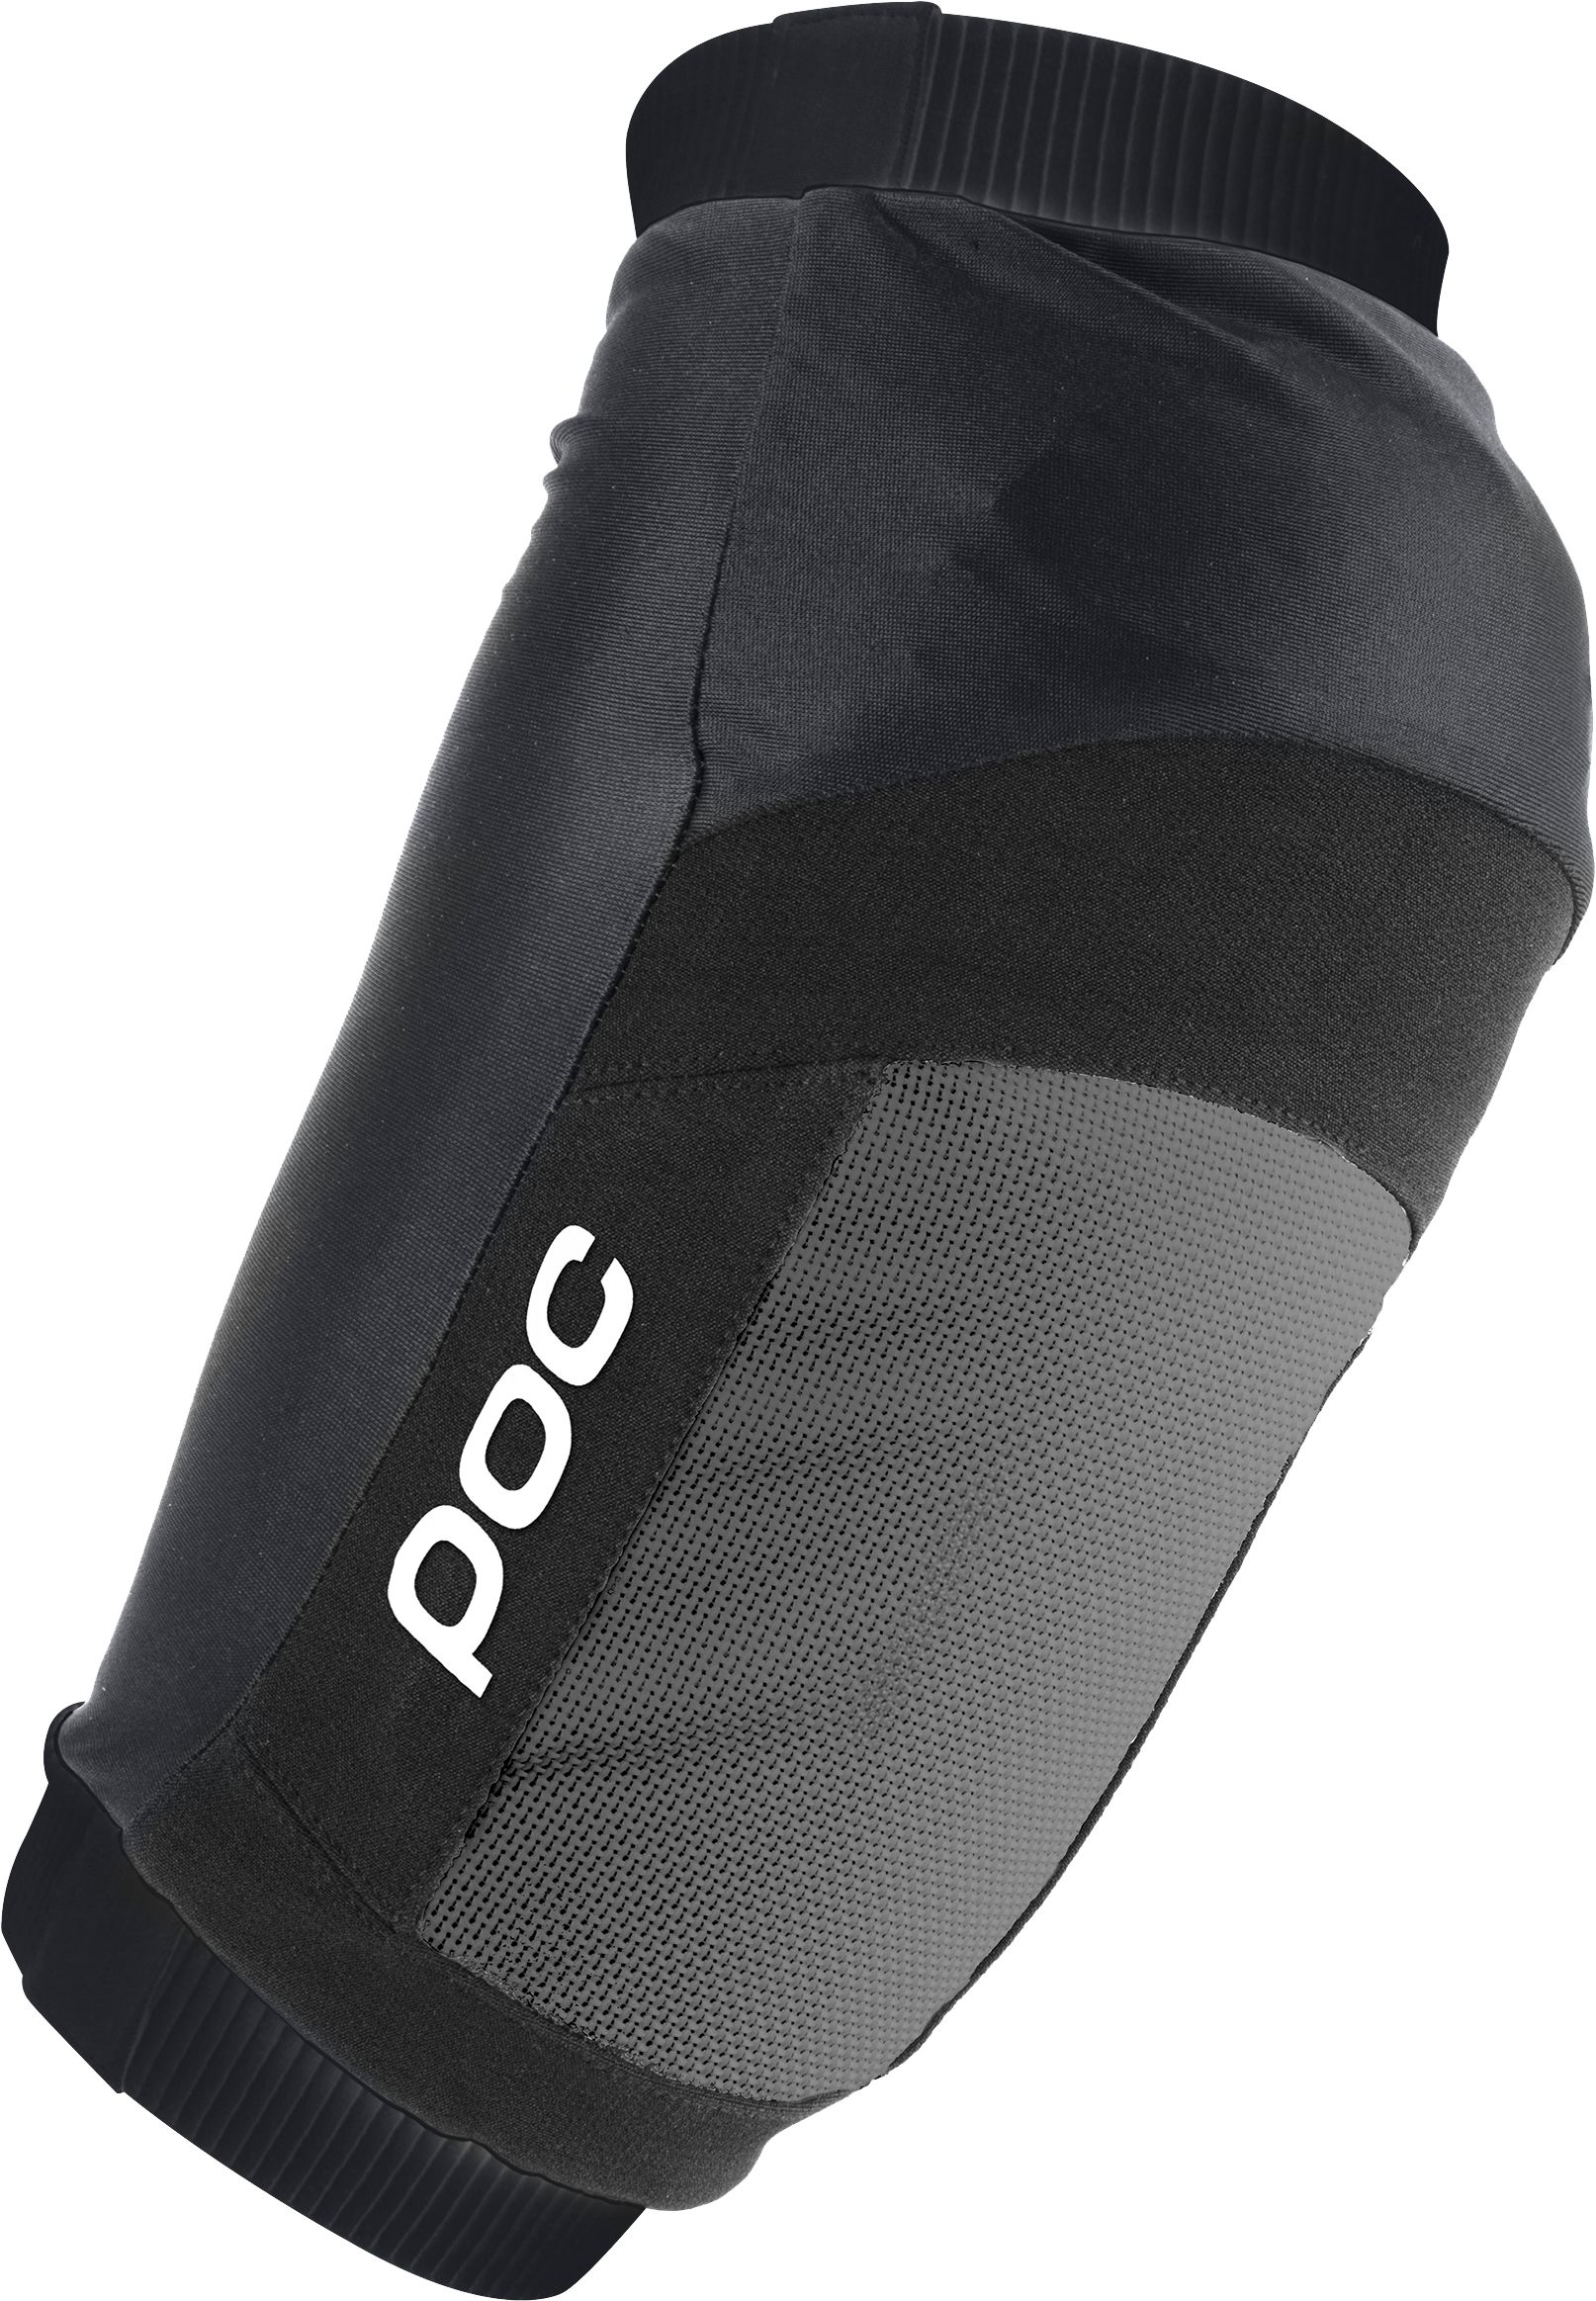 POC, JOINT VPD SYSTEM ELBOW